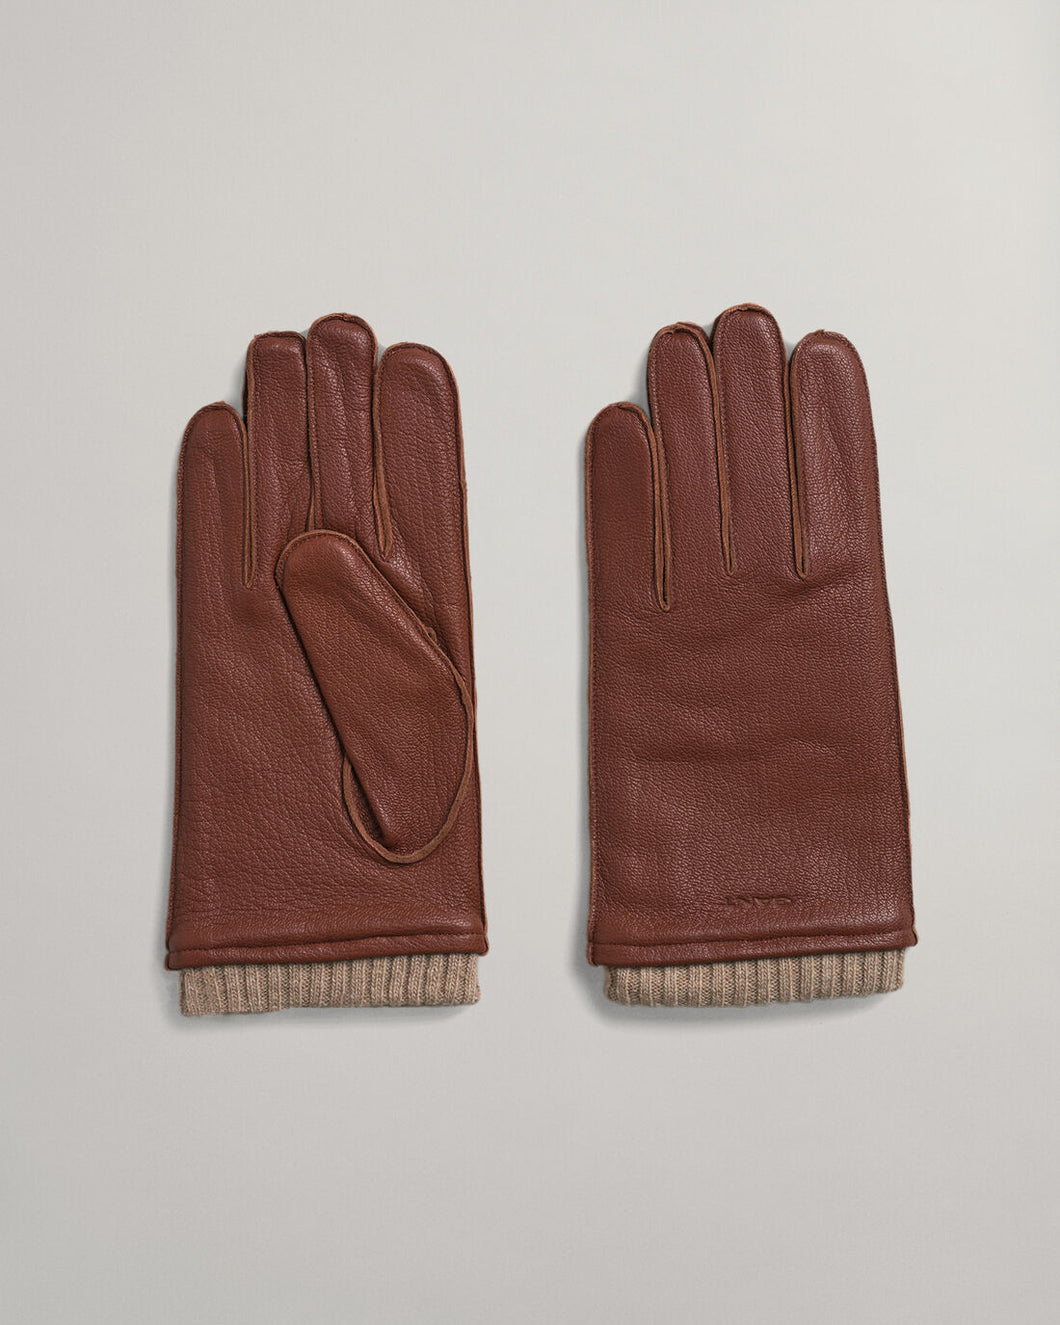 GANT - Leather Gloves, Cashmere Lining, Clay Brown